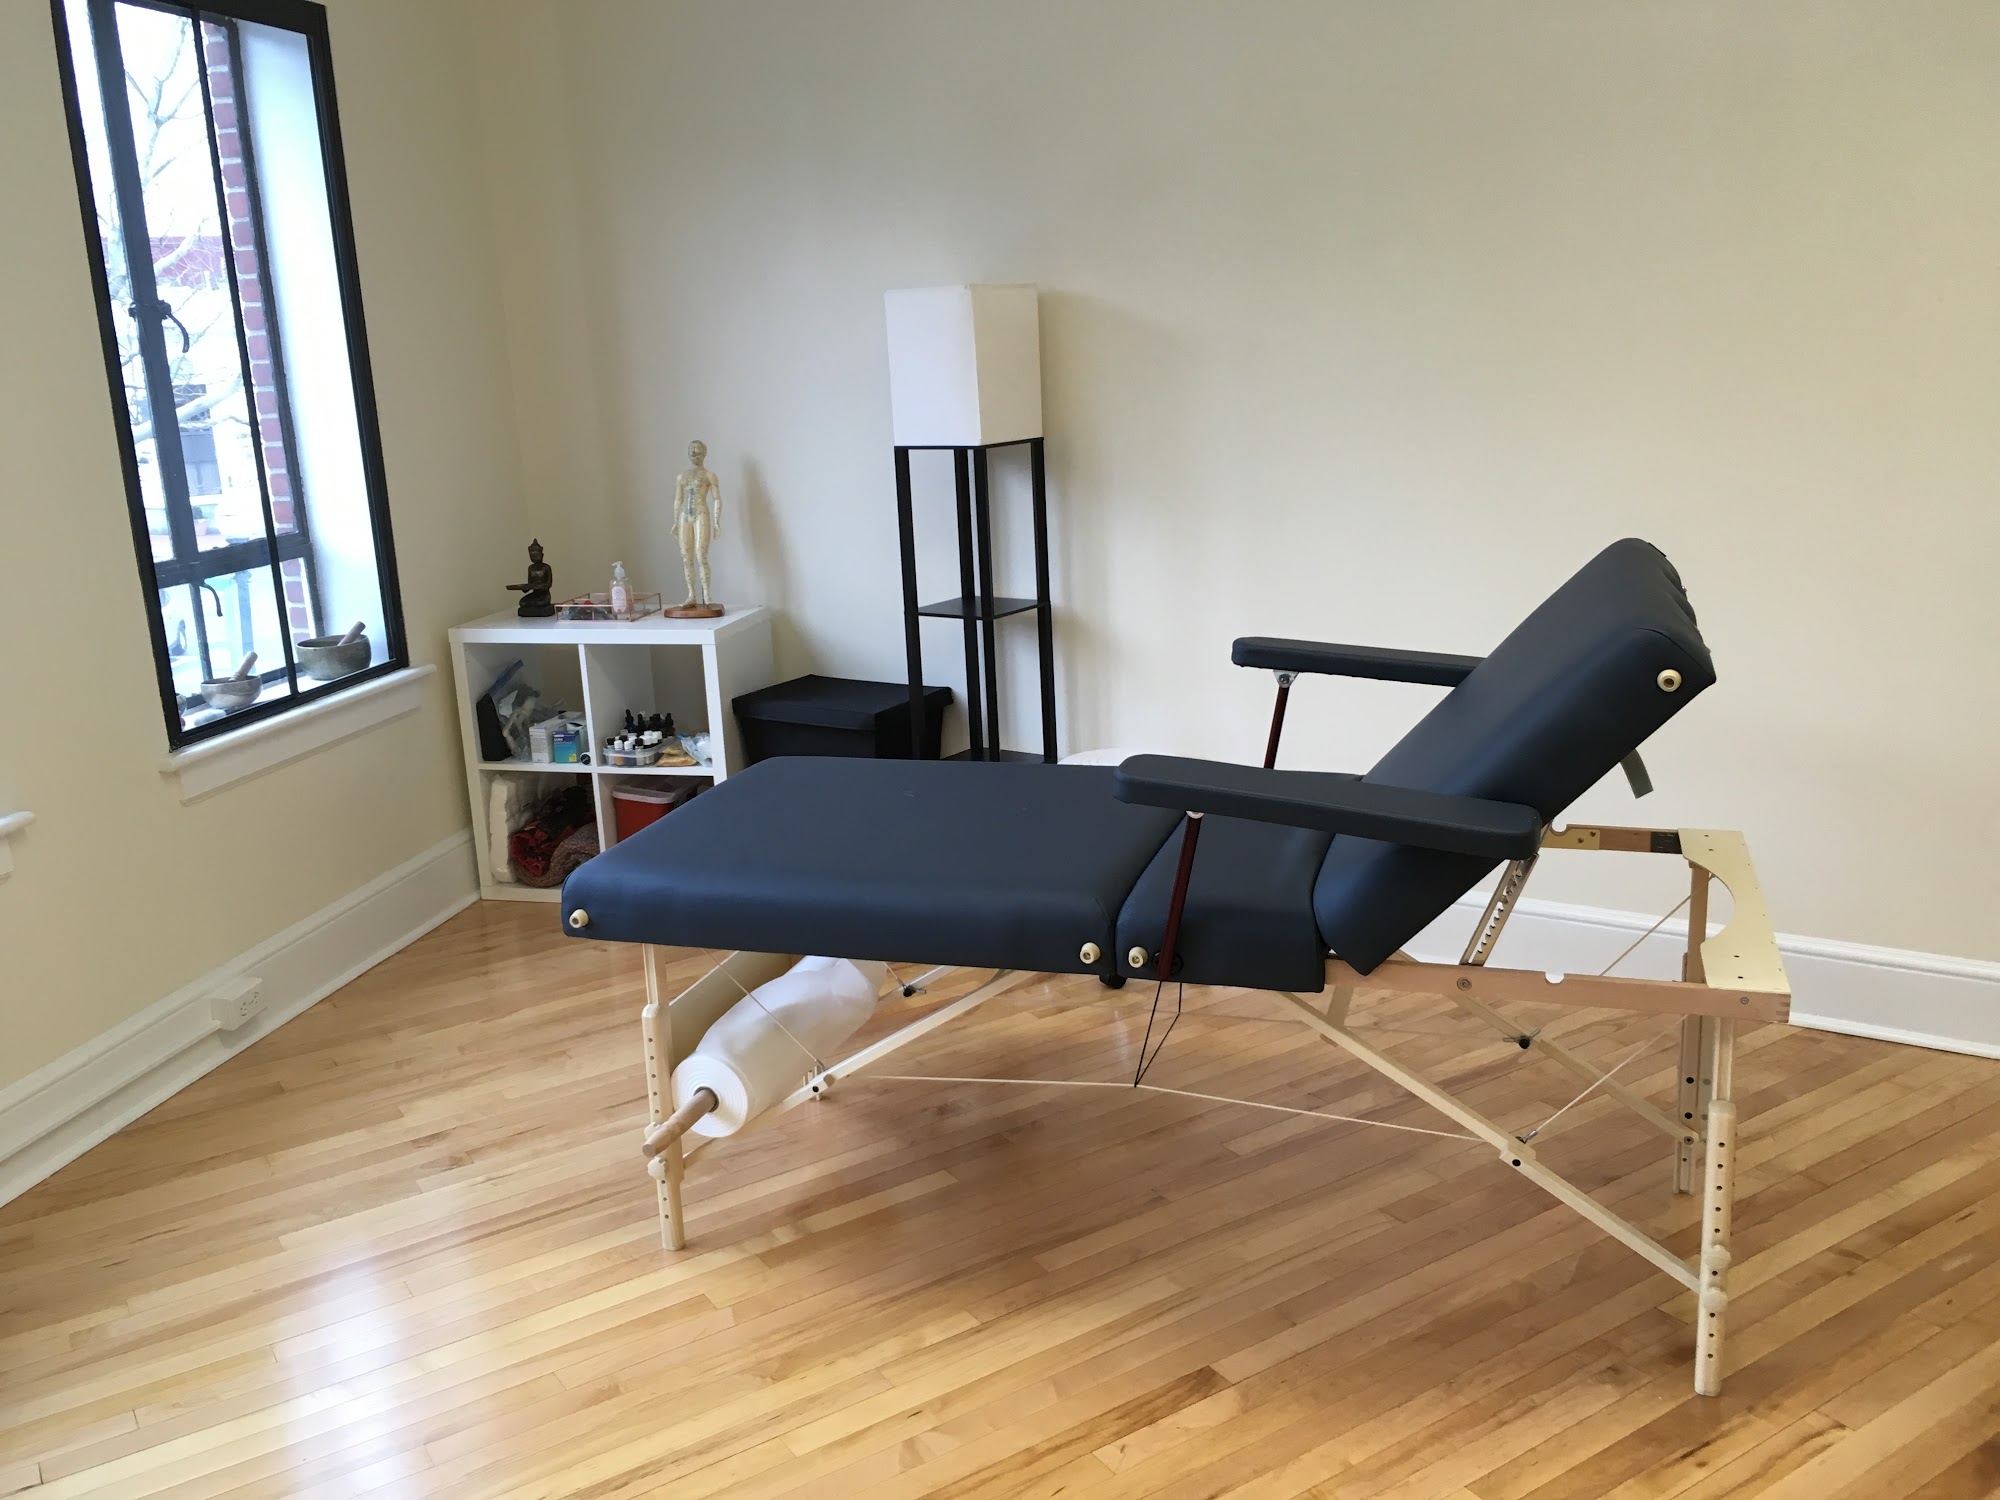 The Family Healing Spot LLC: Acupuncture, Herbs, Qi Gong, and SAUNA!